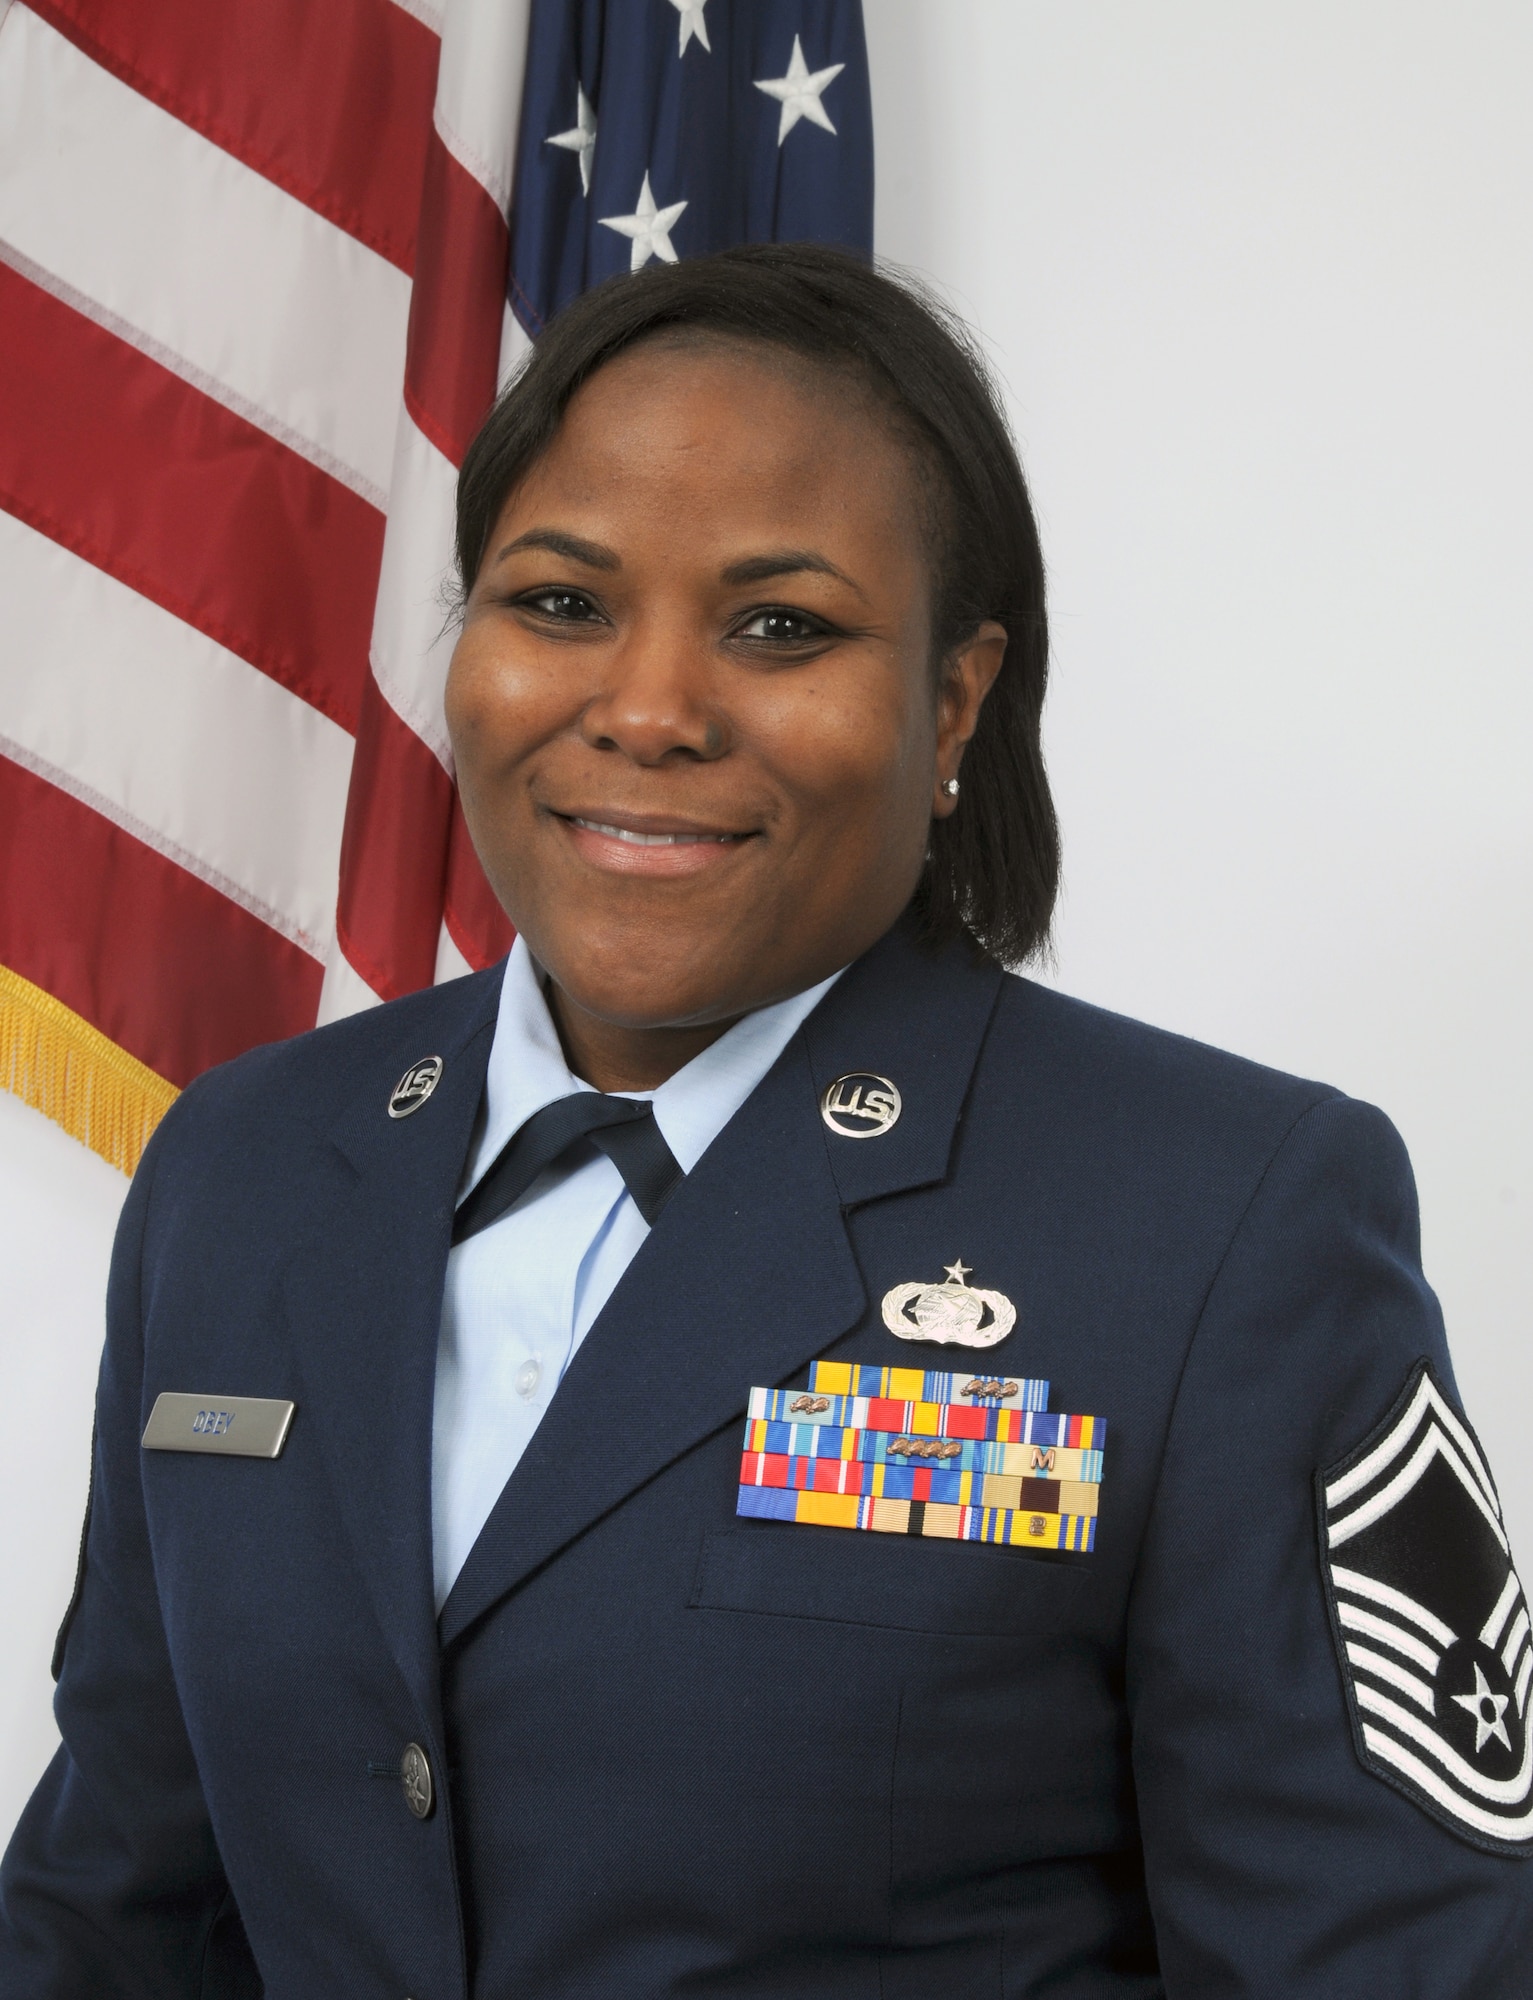 Senior Master Sgt. Patrina Obey, a member of the 166th Logistics Readiness Squadron, 166th Airlift Wing, New Castle, Del., is the Delaware Air National Guard's FY 2009 Senior Noncommissioned Officer of the Year. Sgt. Obey, a resident of Smyrna, Del., is a logistics managment specialist in the 166th LRS. She has prior active duty service in the U.S. Air Force serving at Howard Air Force Base and Dover AFB. She has deployed numerous times to both hemispheres, including two deployments to Southwest Asia with her Delaware ANG unit to the nations of Uzbekistan and Qatar in support of Operation Enduring Freedom. (U.S. Air Force photo/Senior Master Sgt. Gerald Dougherty, Delaware ANG)